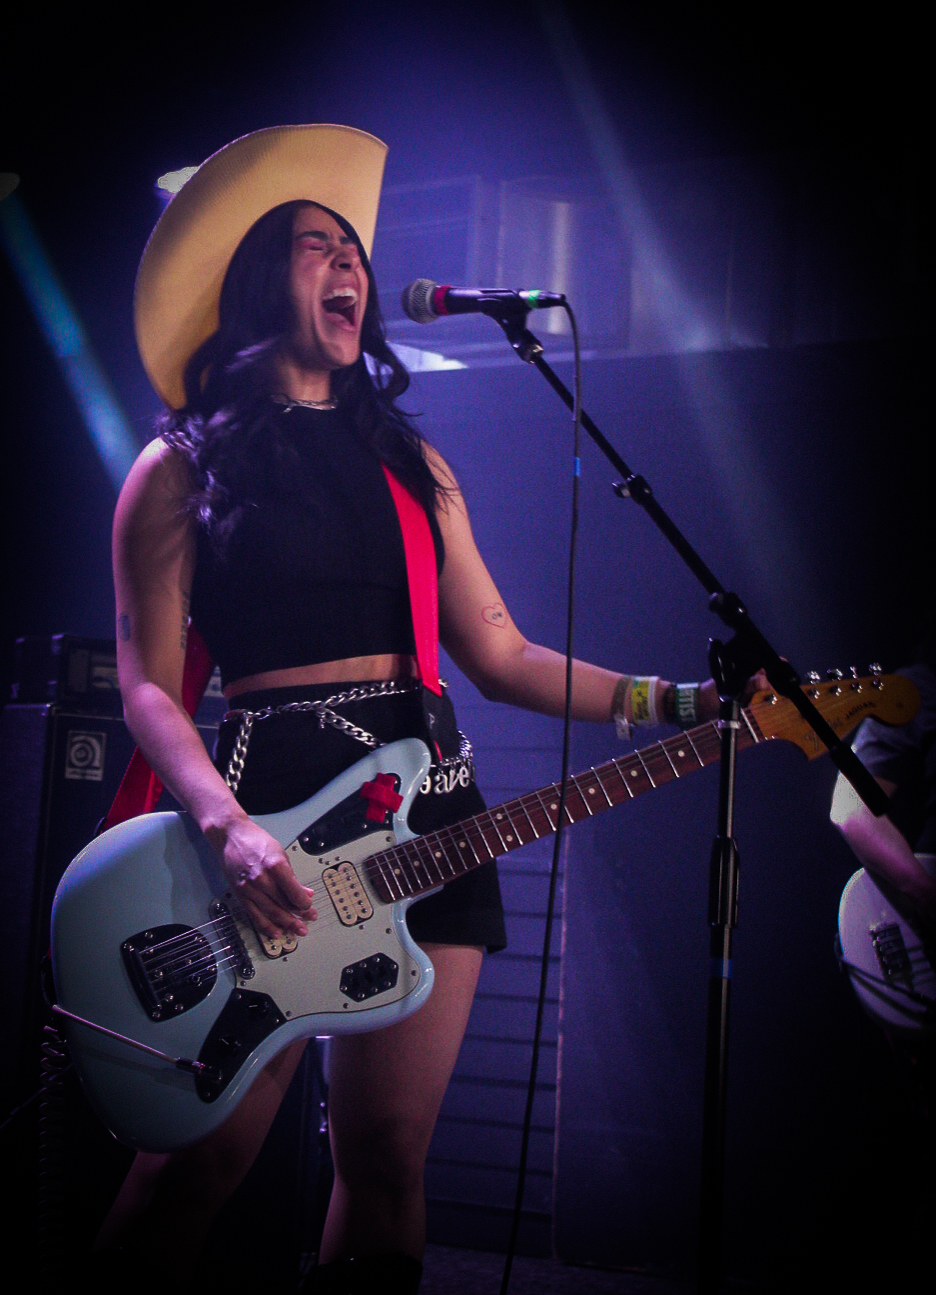  Mia Berrin wears a black two-piece with a silver chain belt, and a white cowboy hat, while playing a powder blue electric guitar.